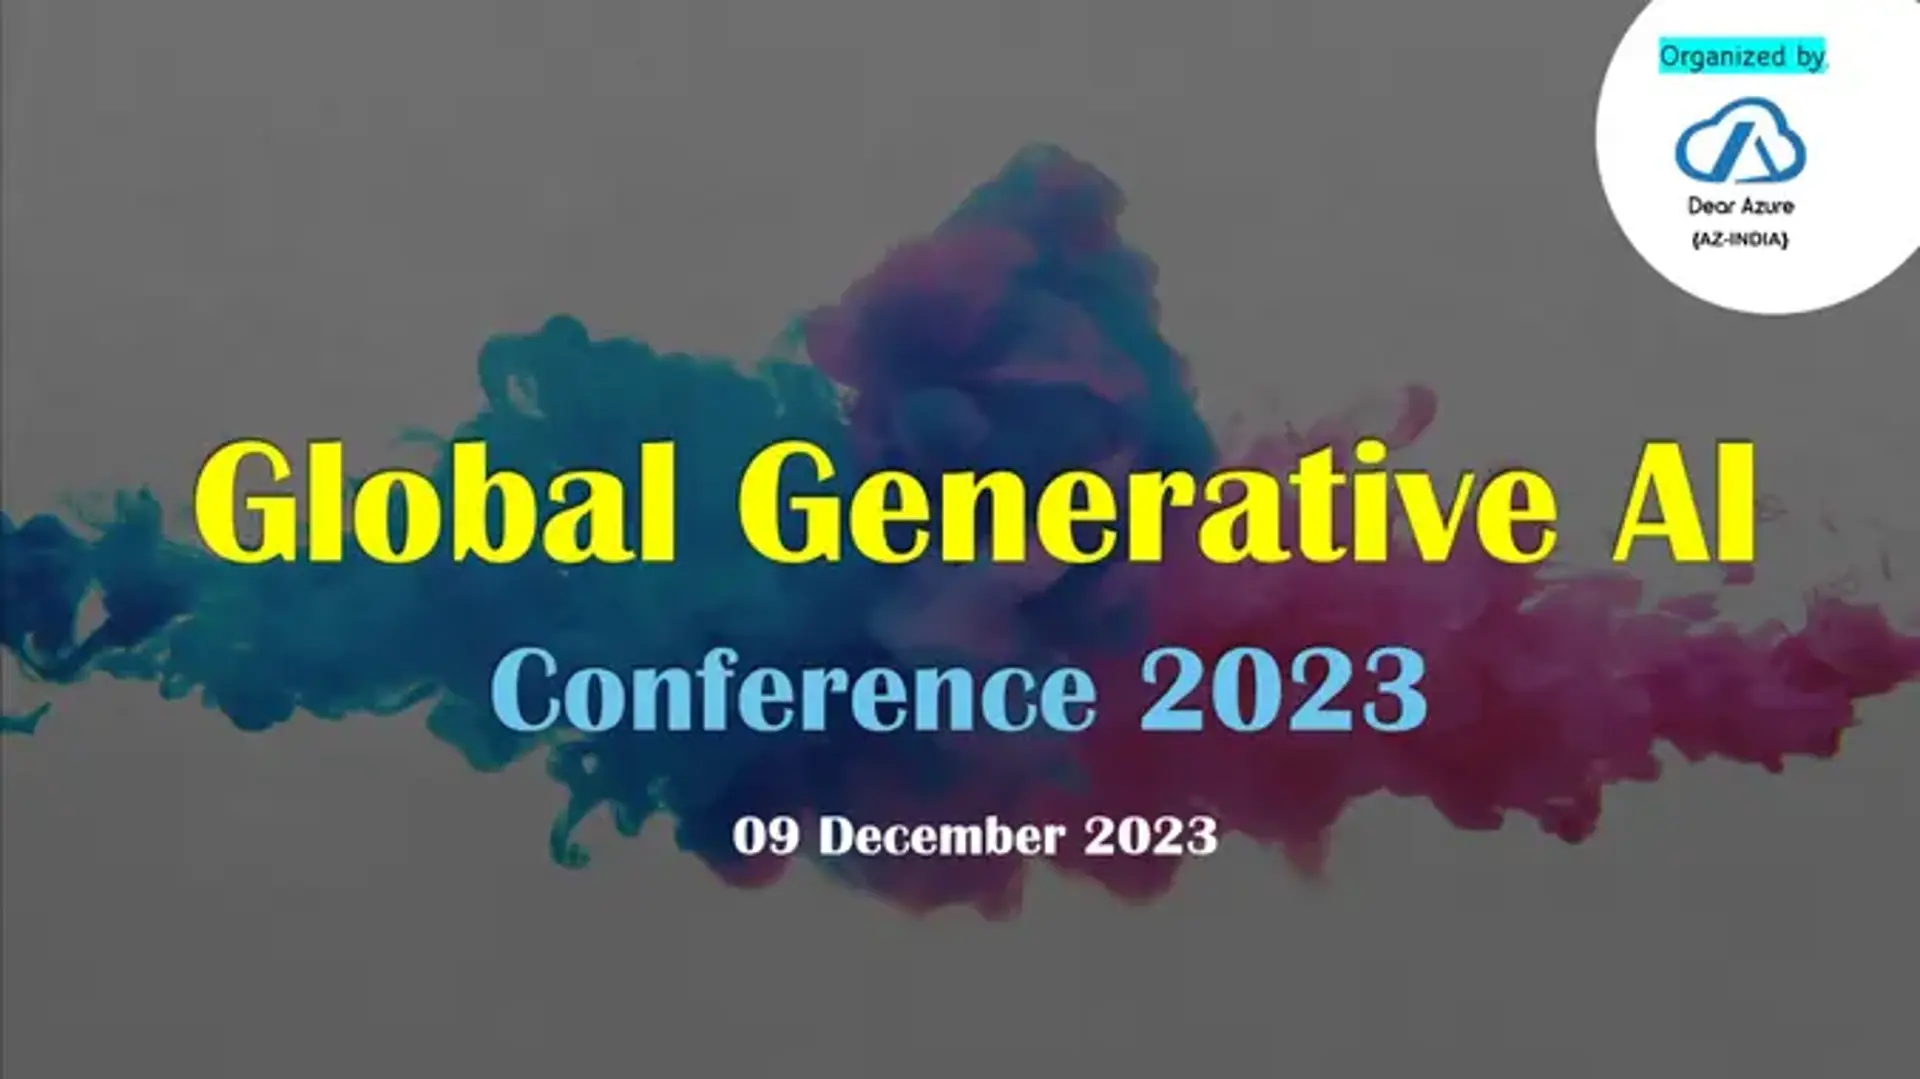 Global Generative AI Conference 2023